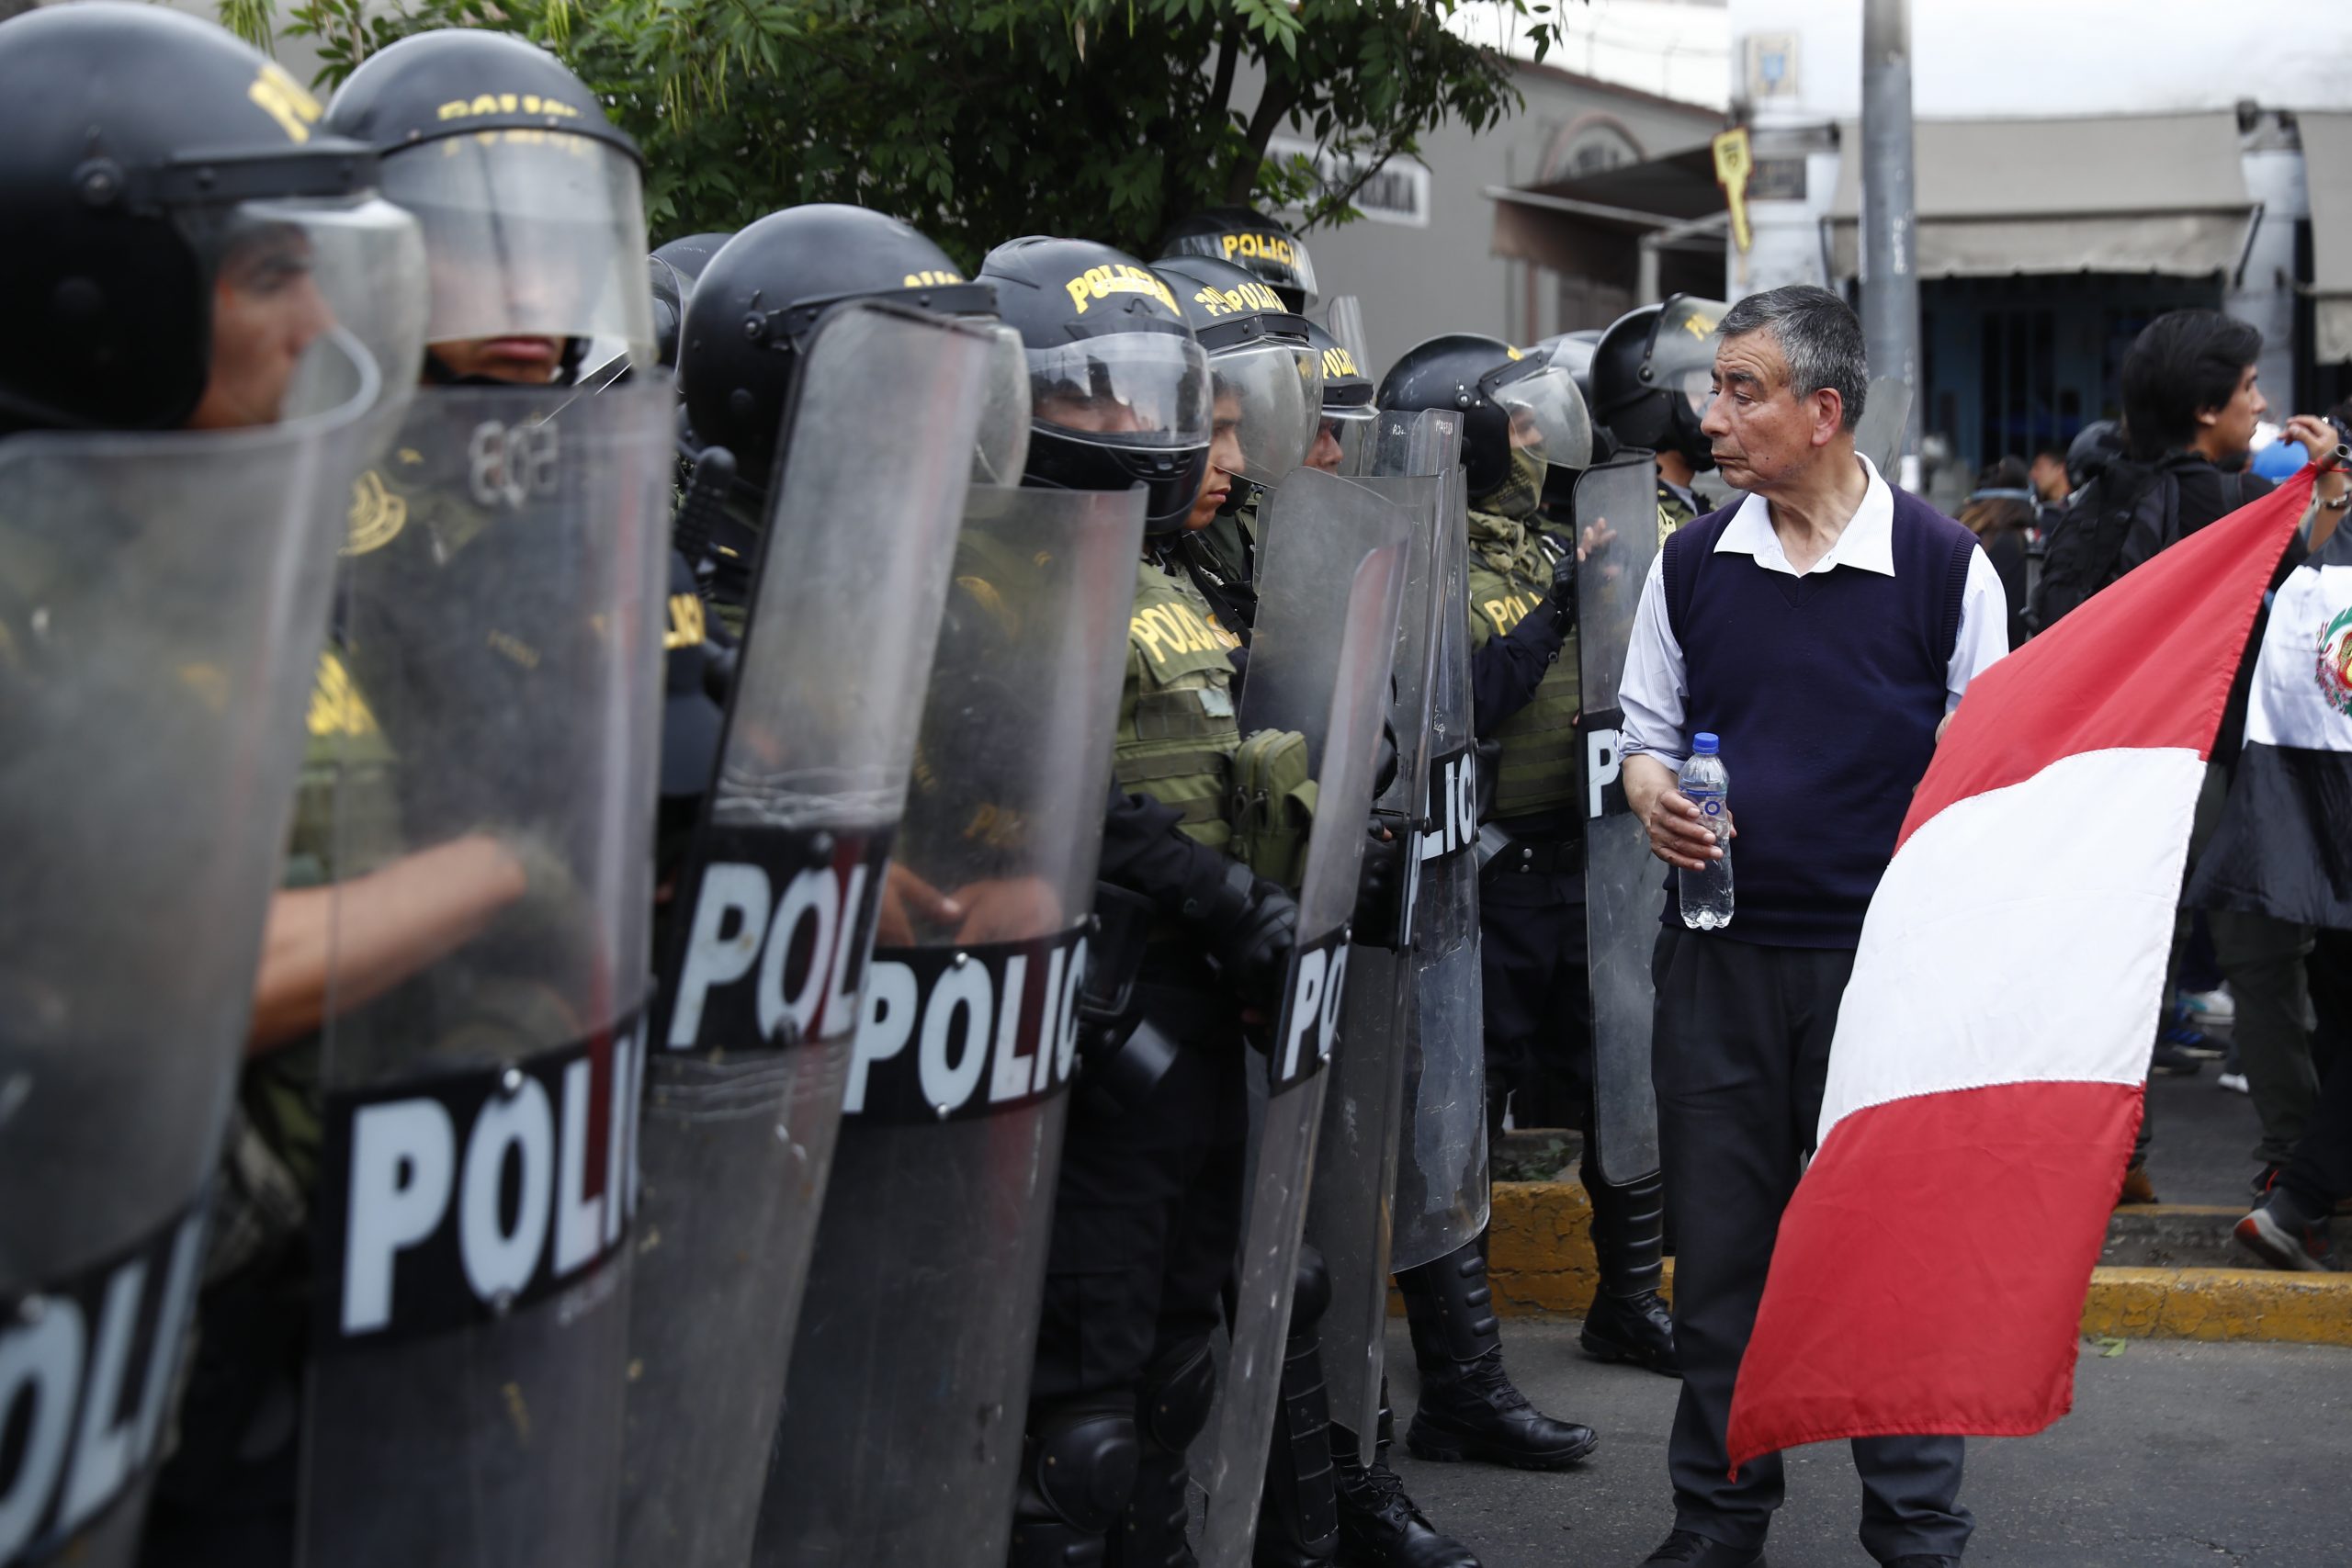 epa10419302 A man with a Peruvian flag walks in front of members of the Police during a new anti-government march in Lima, Peru, 20 January 2023. The anti-government demonstrations led to new clashes with the security forces and caused 'severe damage' to the infrastructure in the historic center of the Peruvian capital, official sources reported. The protests brought together thousands of people for the second day in a row, many of them coming from the southern regions of Peru and, after a peaceful start, led to clashes with police officers, who fired tear gas on various streets.  EPA/Hugo Curotto